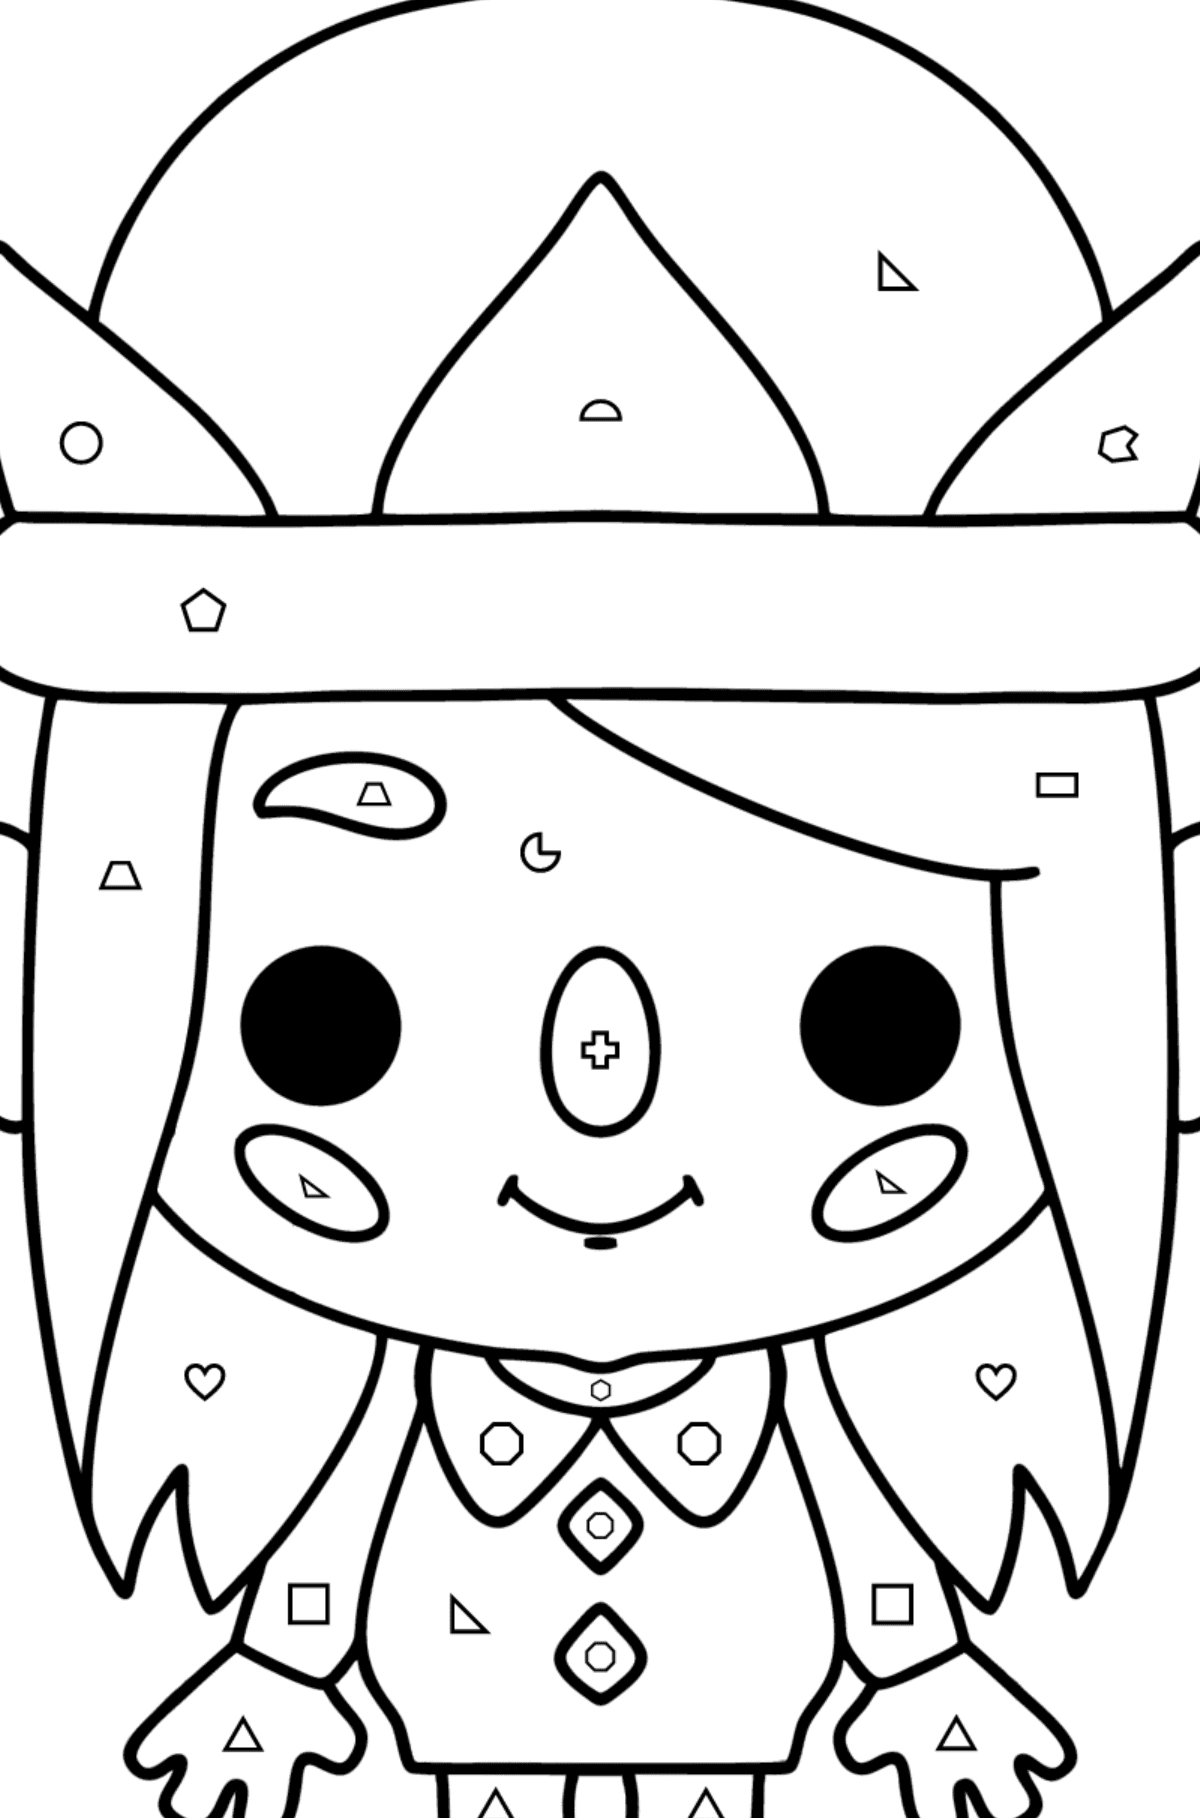 Colouring page Baby tocaboca 01 - Coloring by Geometric Shapes for Kids